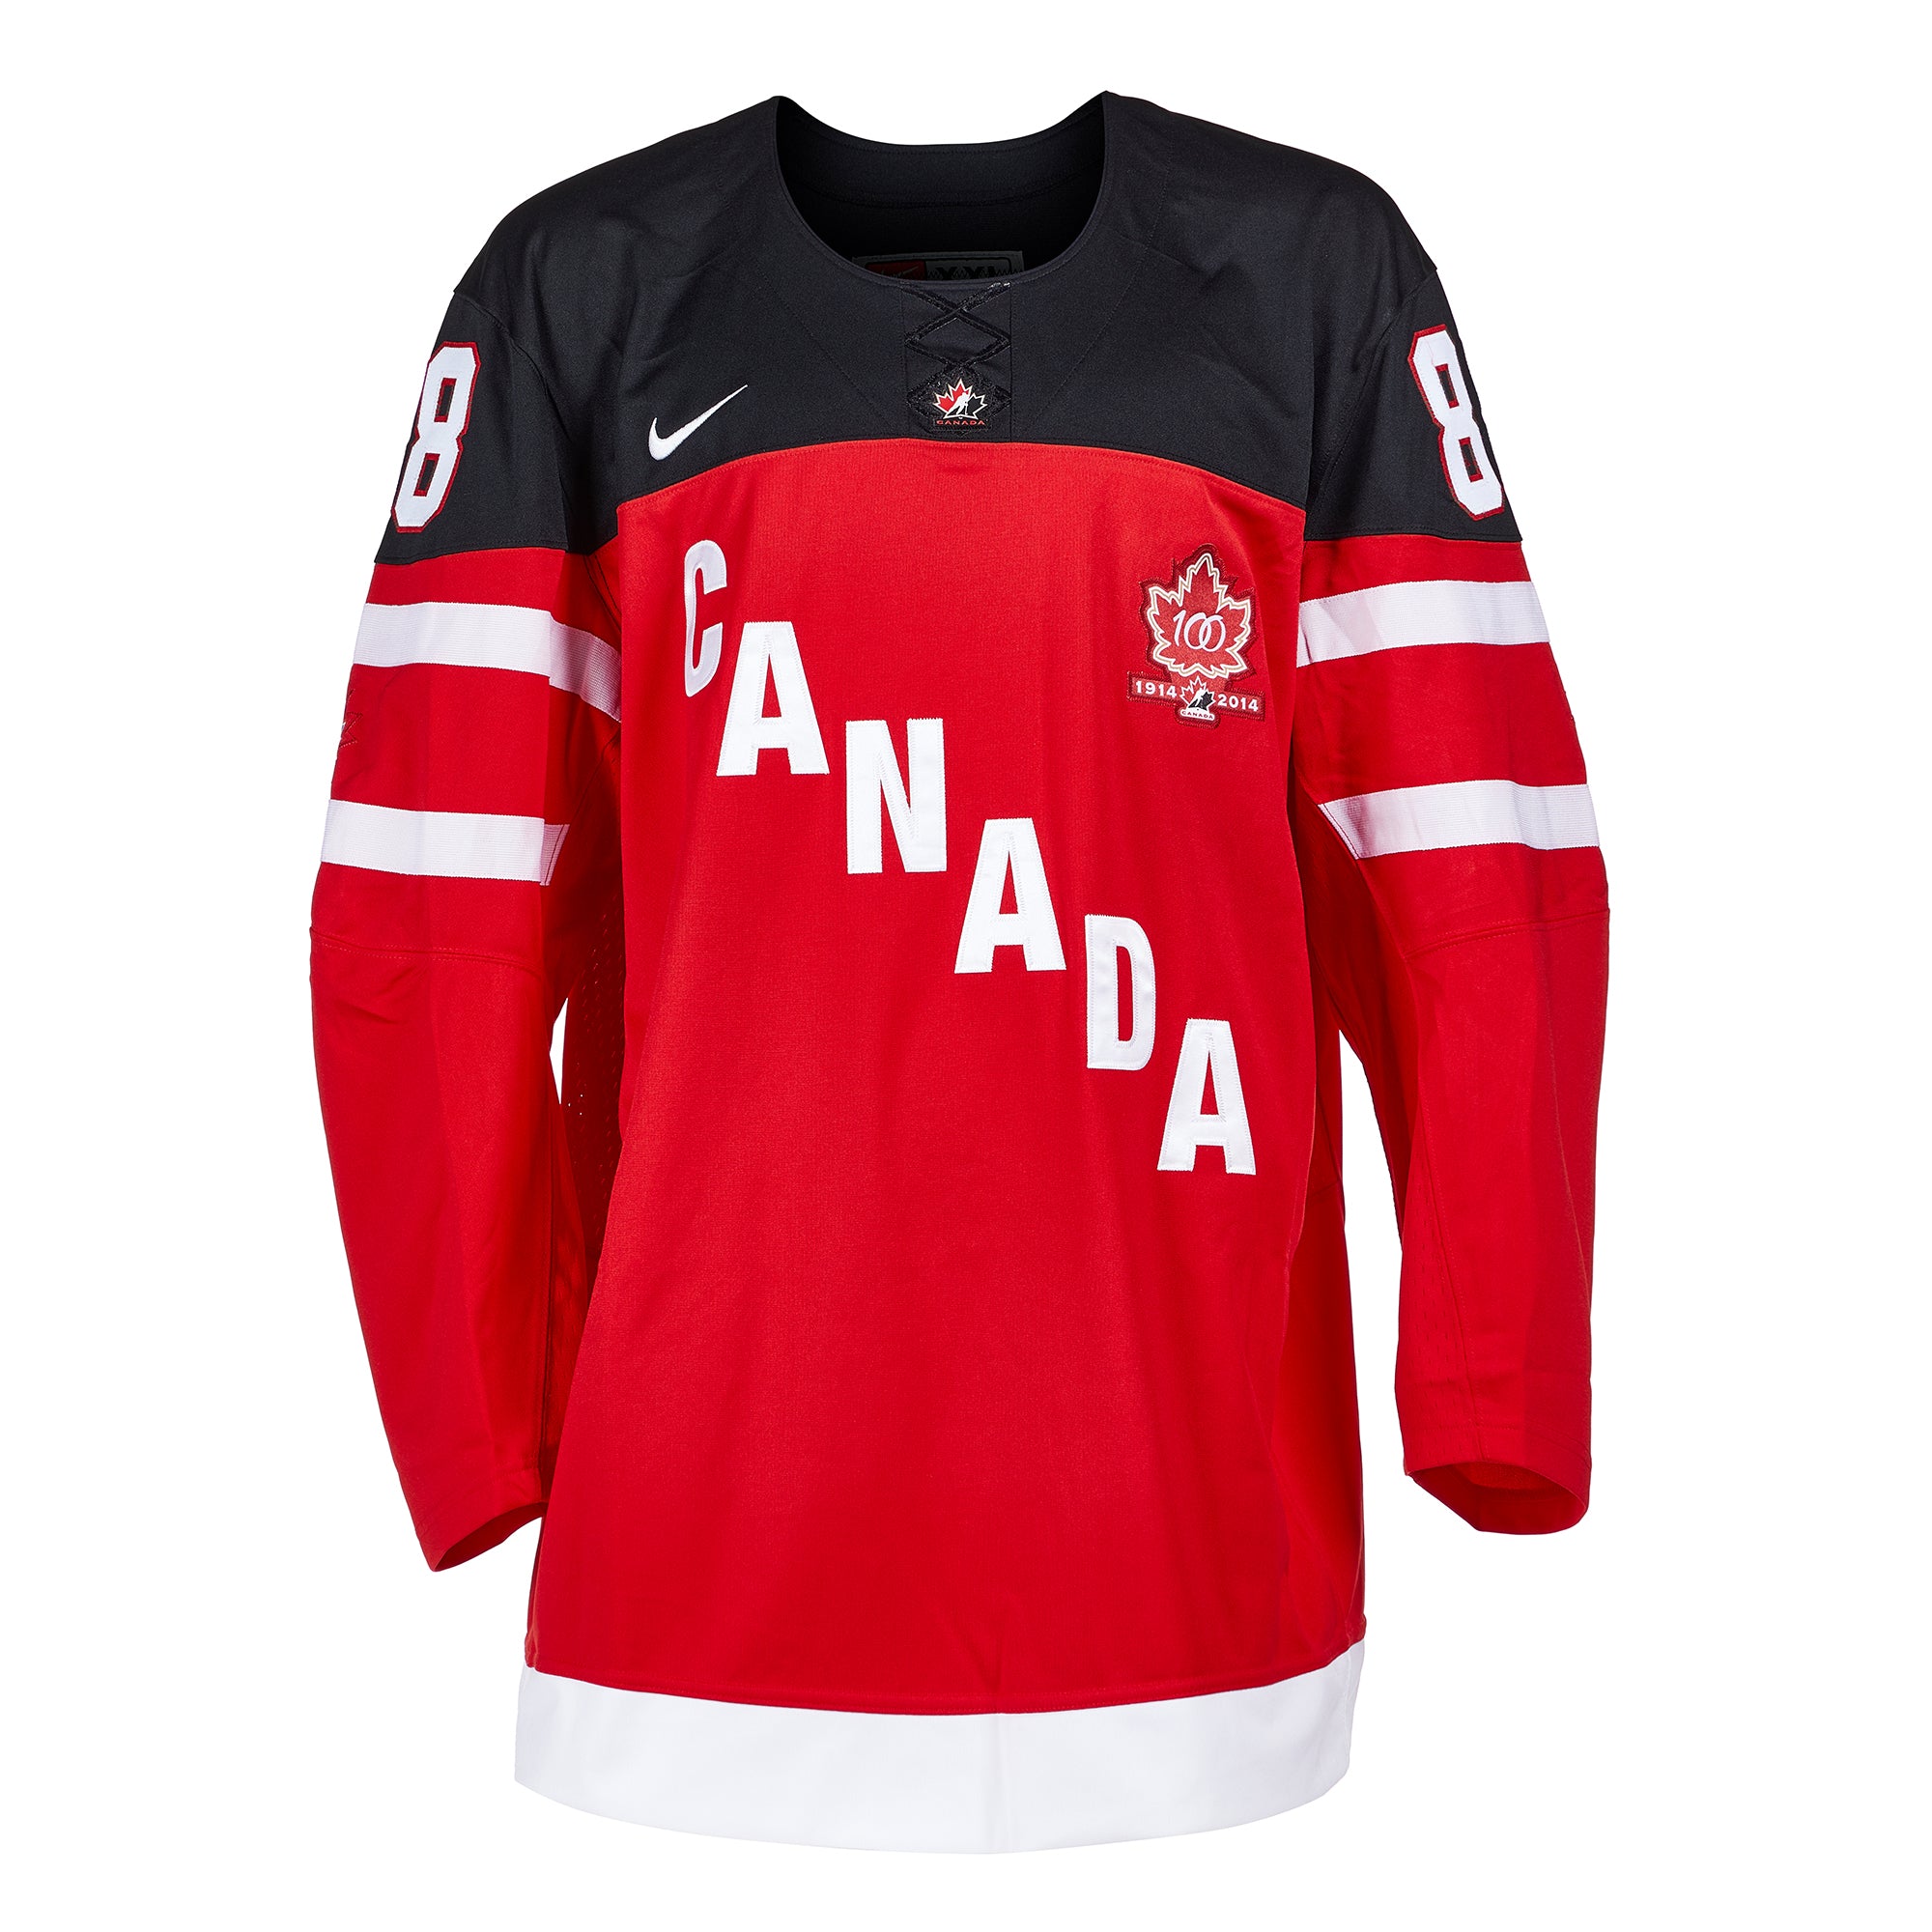 Eric Lindros Team Canada Signed 100th Anniversary Nike Jersey